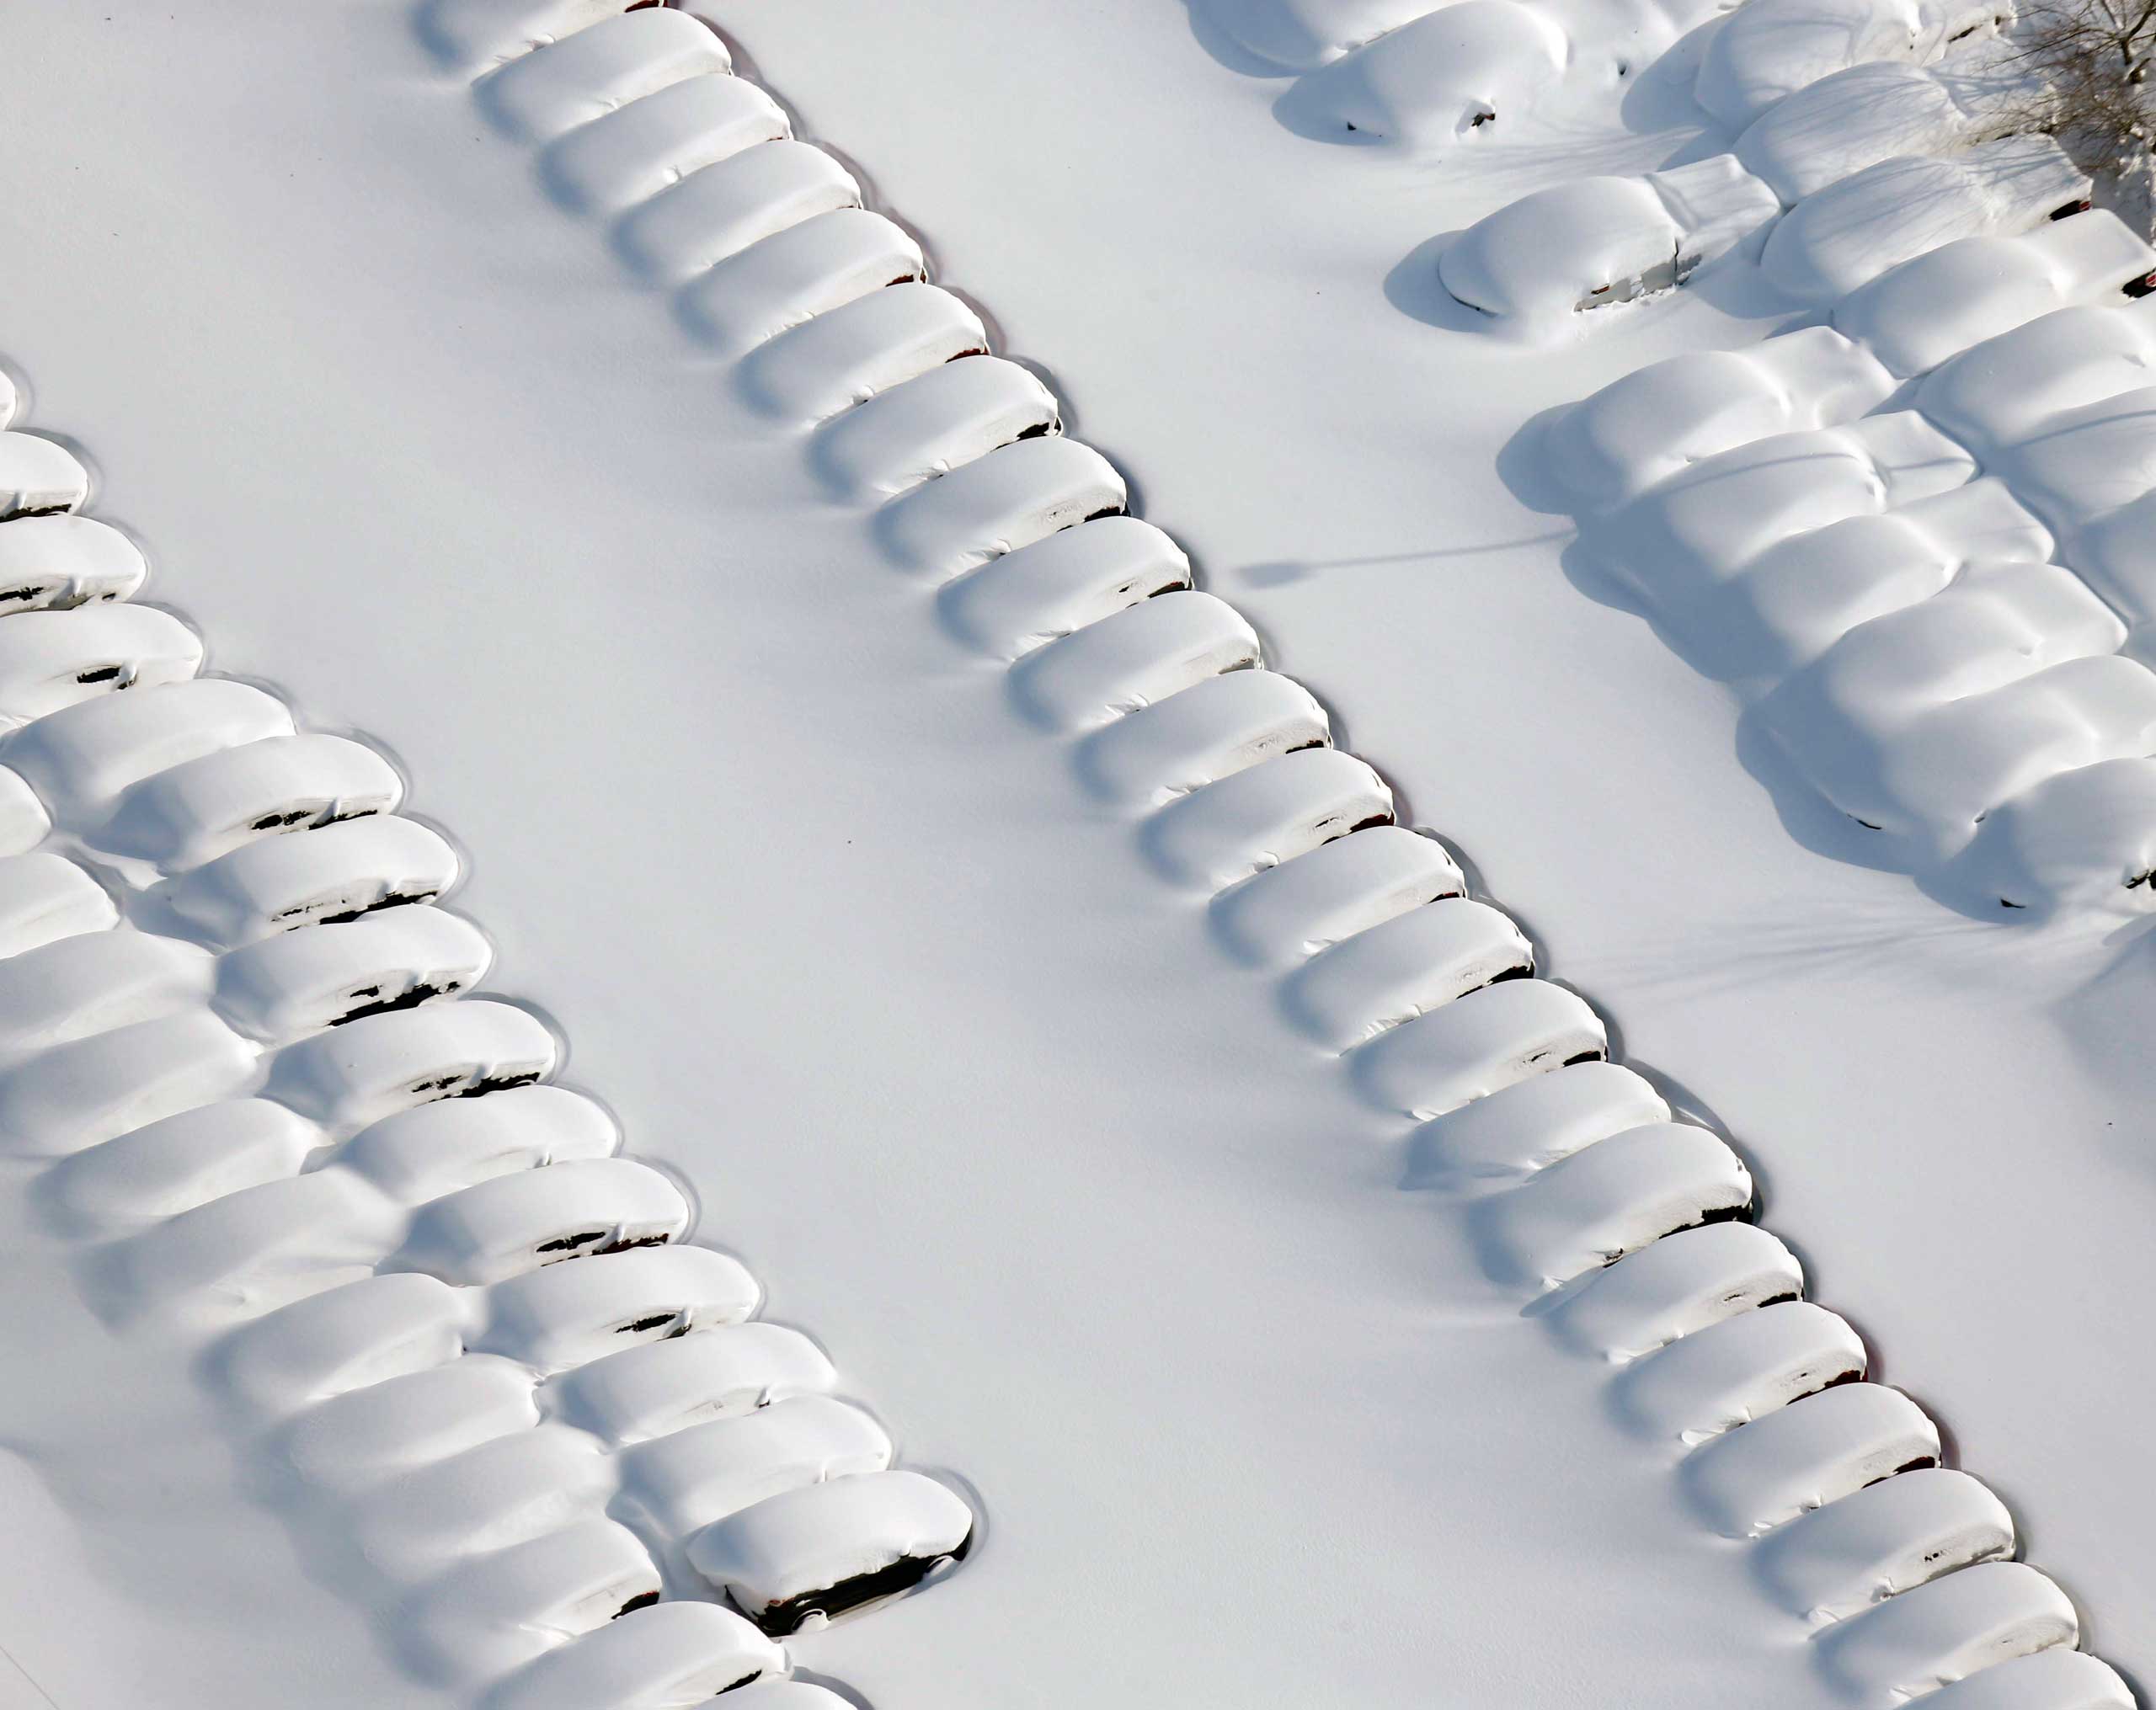 Cars are covered in snow in Orchard Park, N.Y. on Nov. 19, 2014.